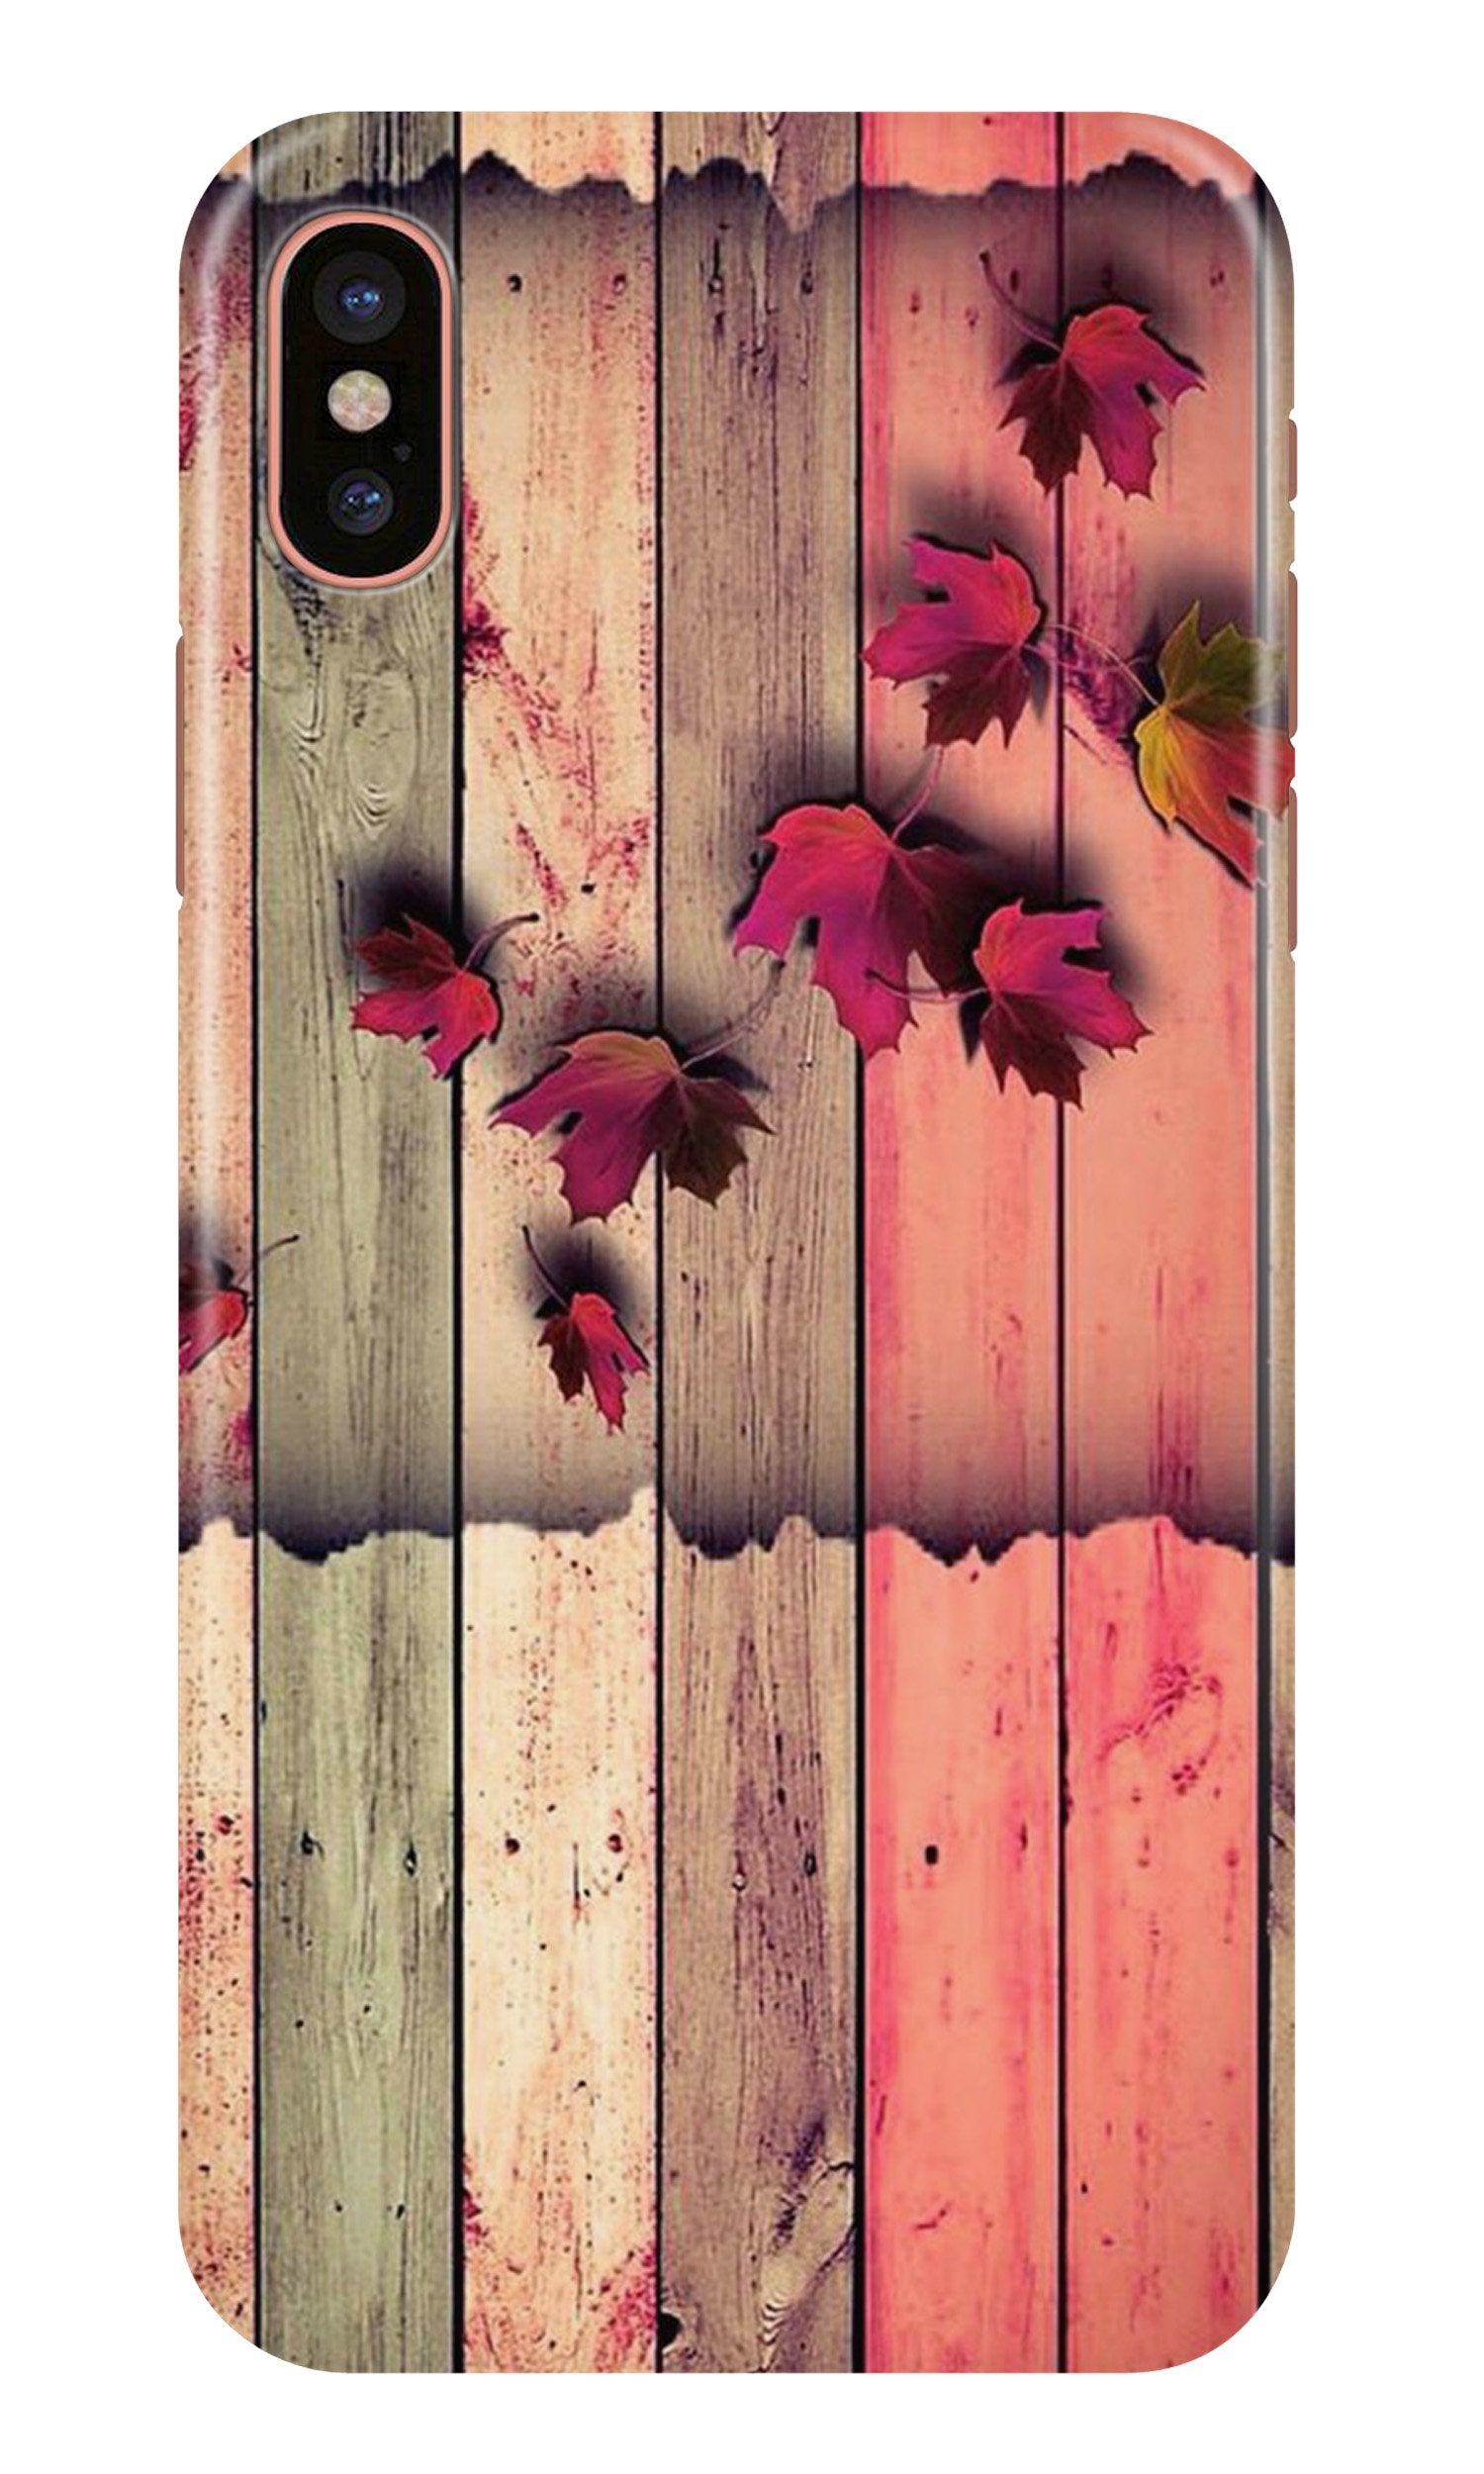 Wooden look2 Case for iPhone X